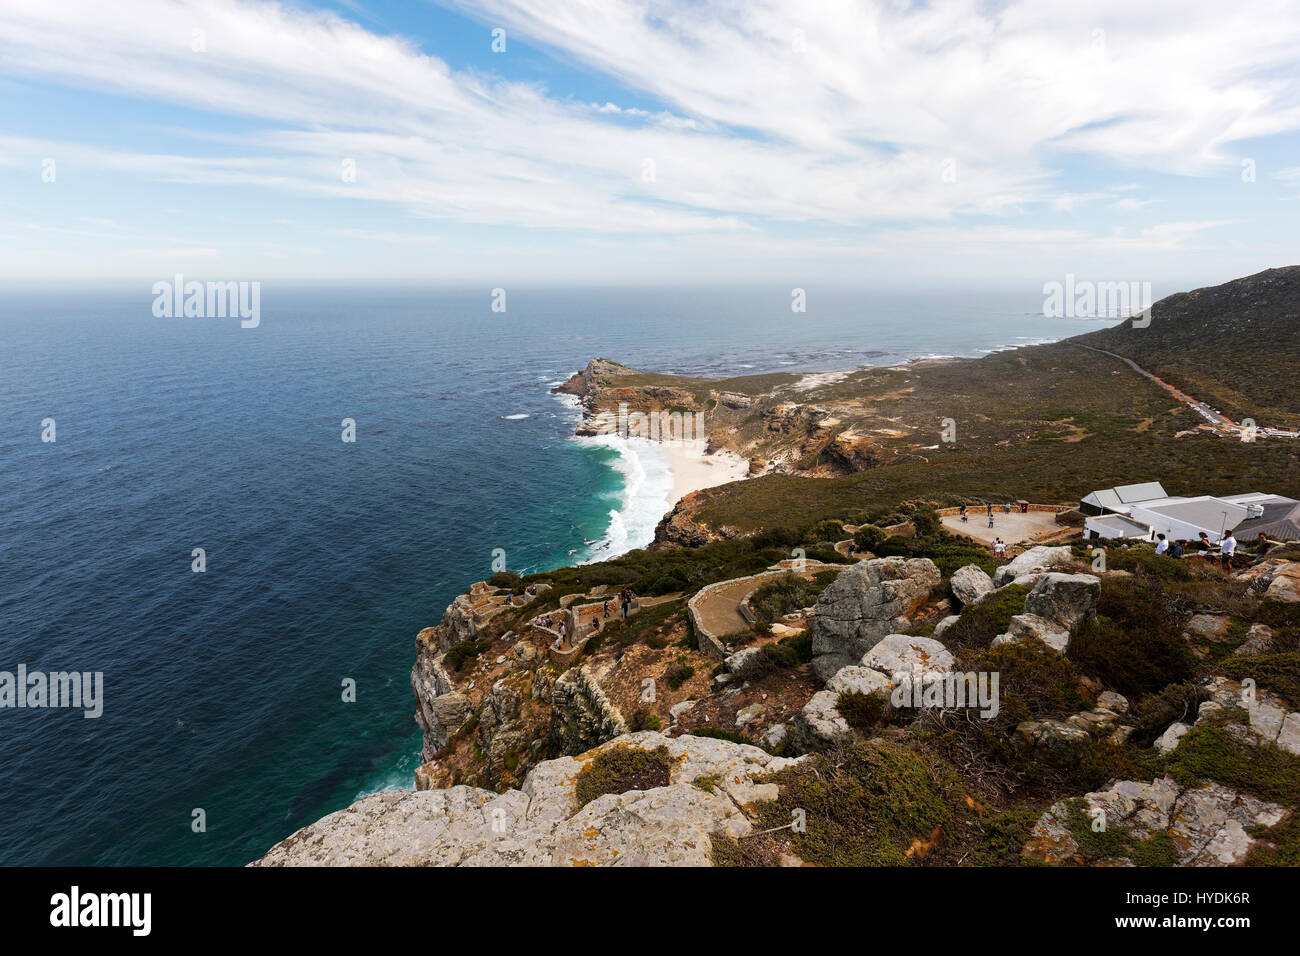 Lookout view to, Cape of Good Hope coastline, Table Mountain National Park, Western Cape, South Africa Stock Photo